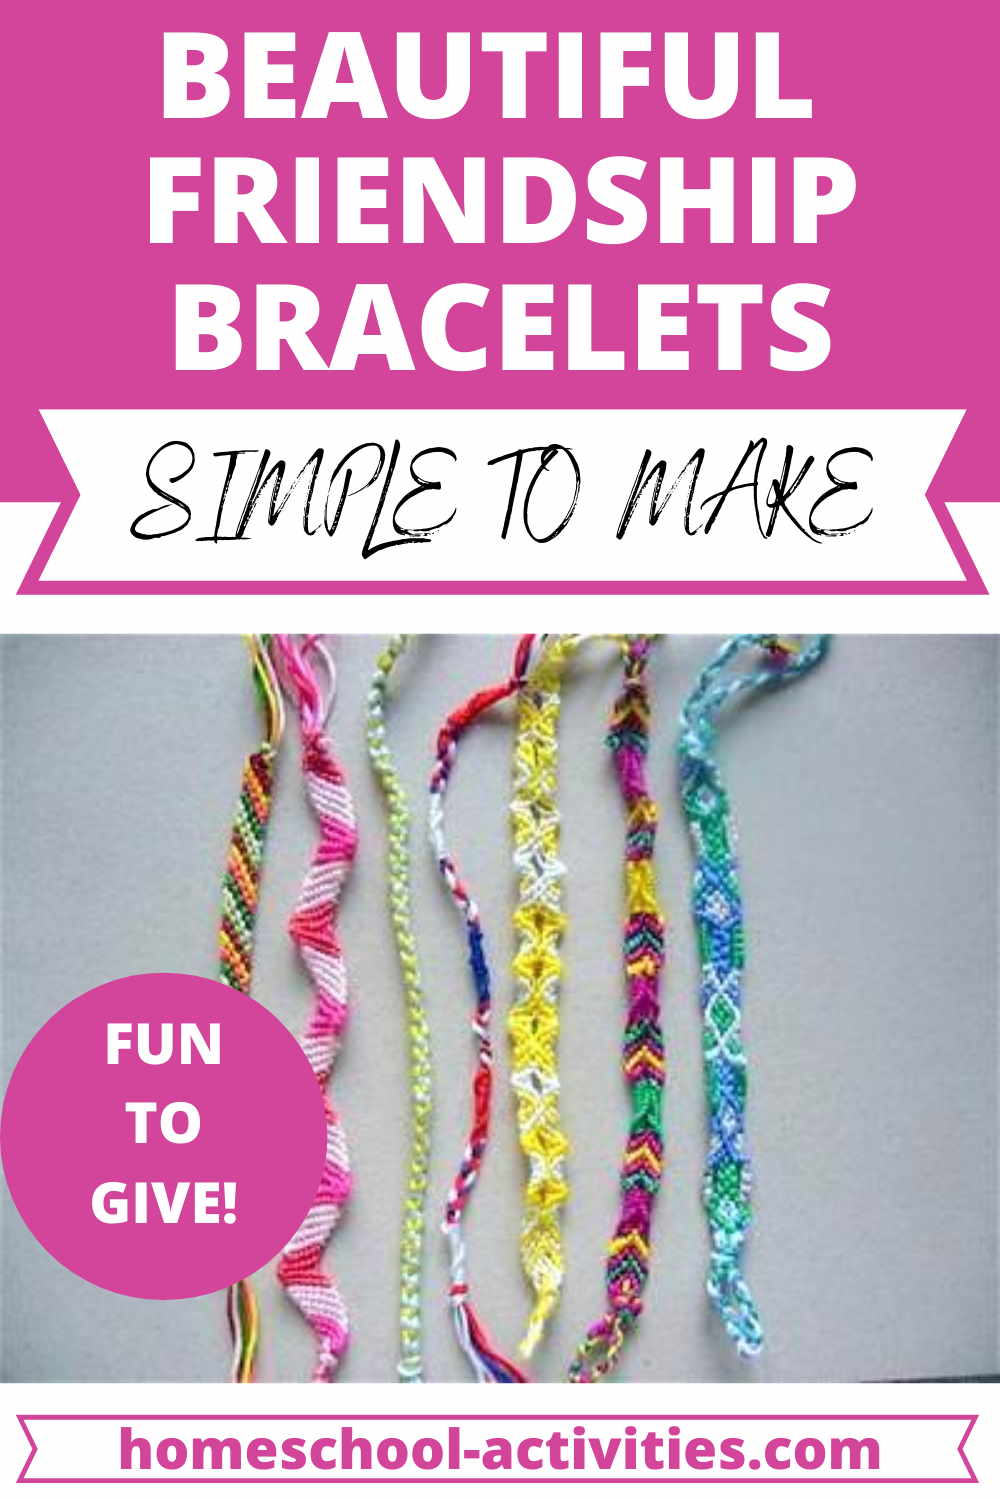 Buy Friendship Bracelet Making Kit Huge Value Letter Beads Crafts For  Girls 20 MultiColor Embroidery Floss AZ Alphabet Beads Knot  Patterns Colorful String Bracelet Charms Friendship Bracelets Online at  Low Prices in